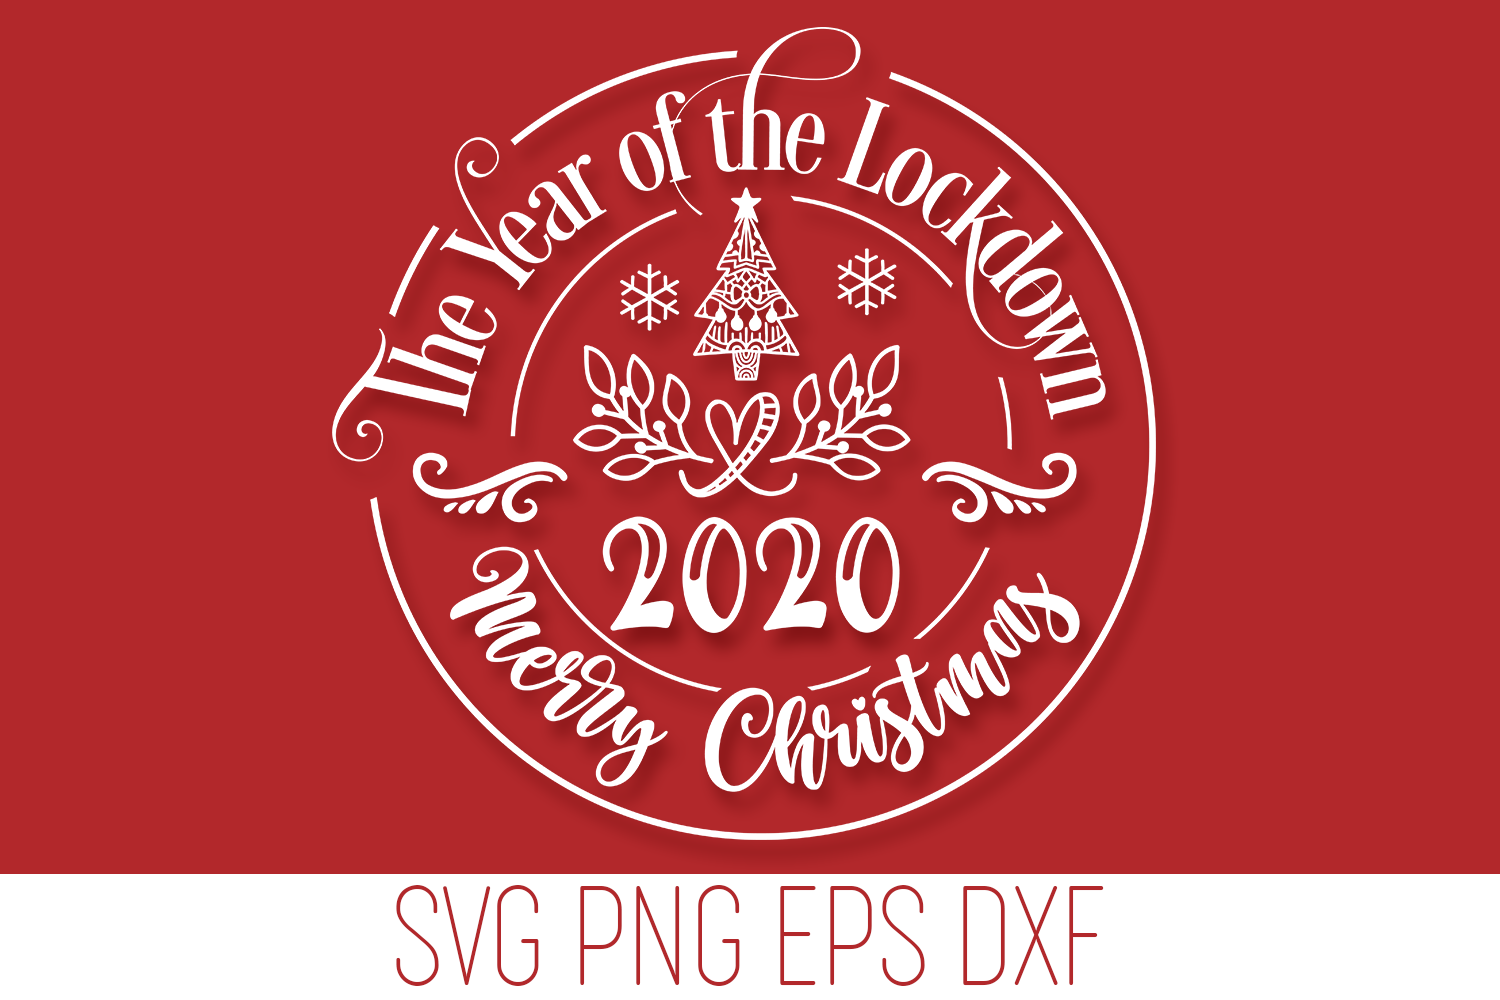 Download Merry Christmas 2020 Svg The Year Of The Lockdown By Anastasia Feya Fonts Svg Cut Files Thehungryjpeg Com